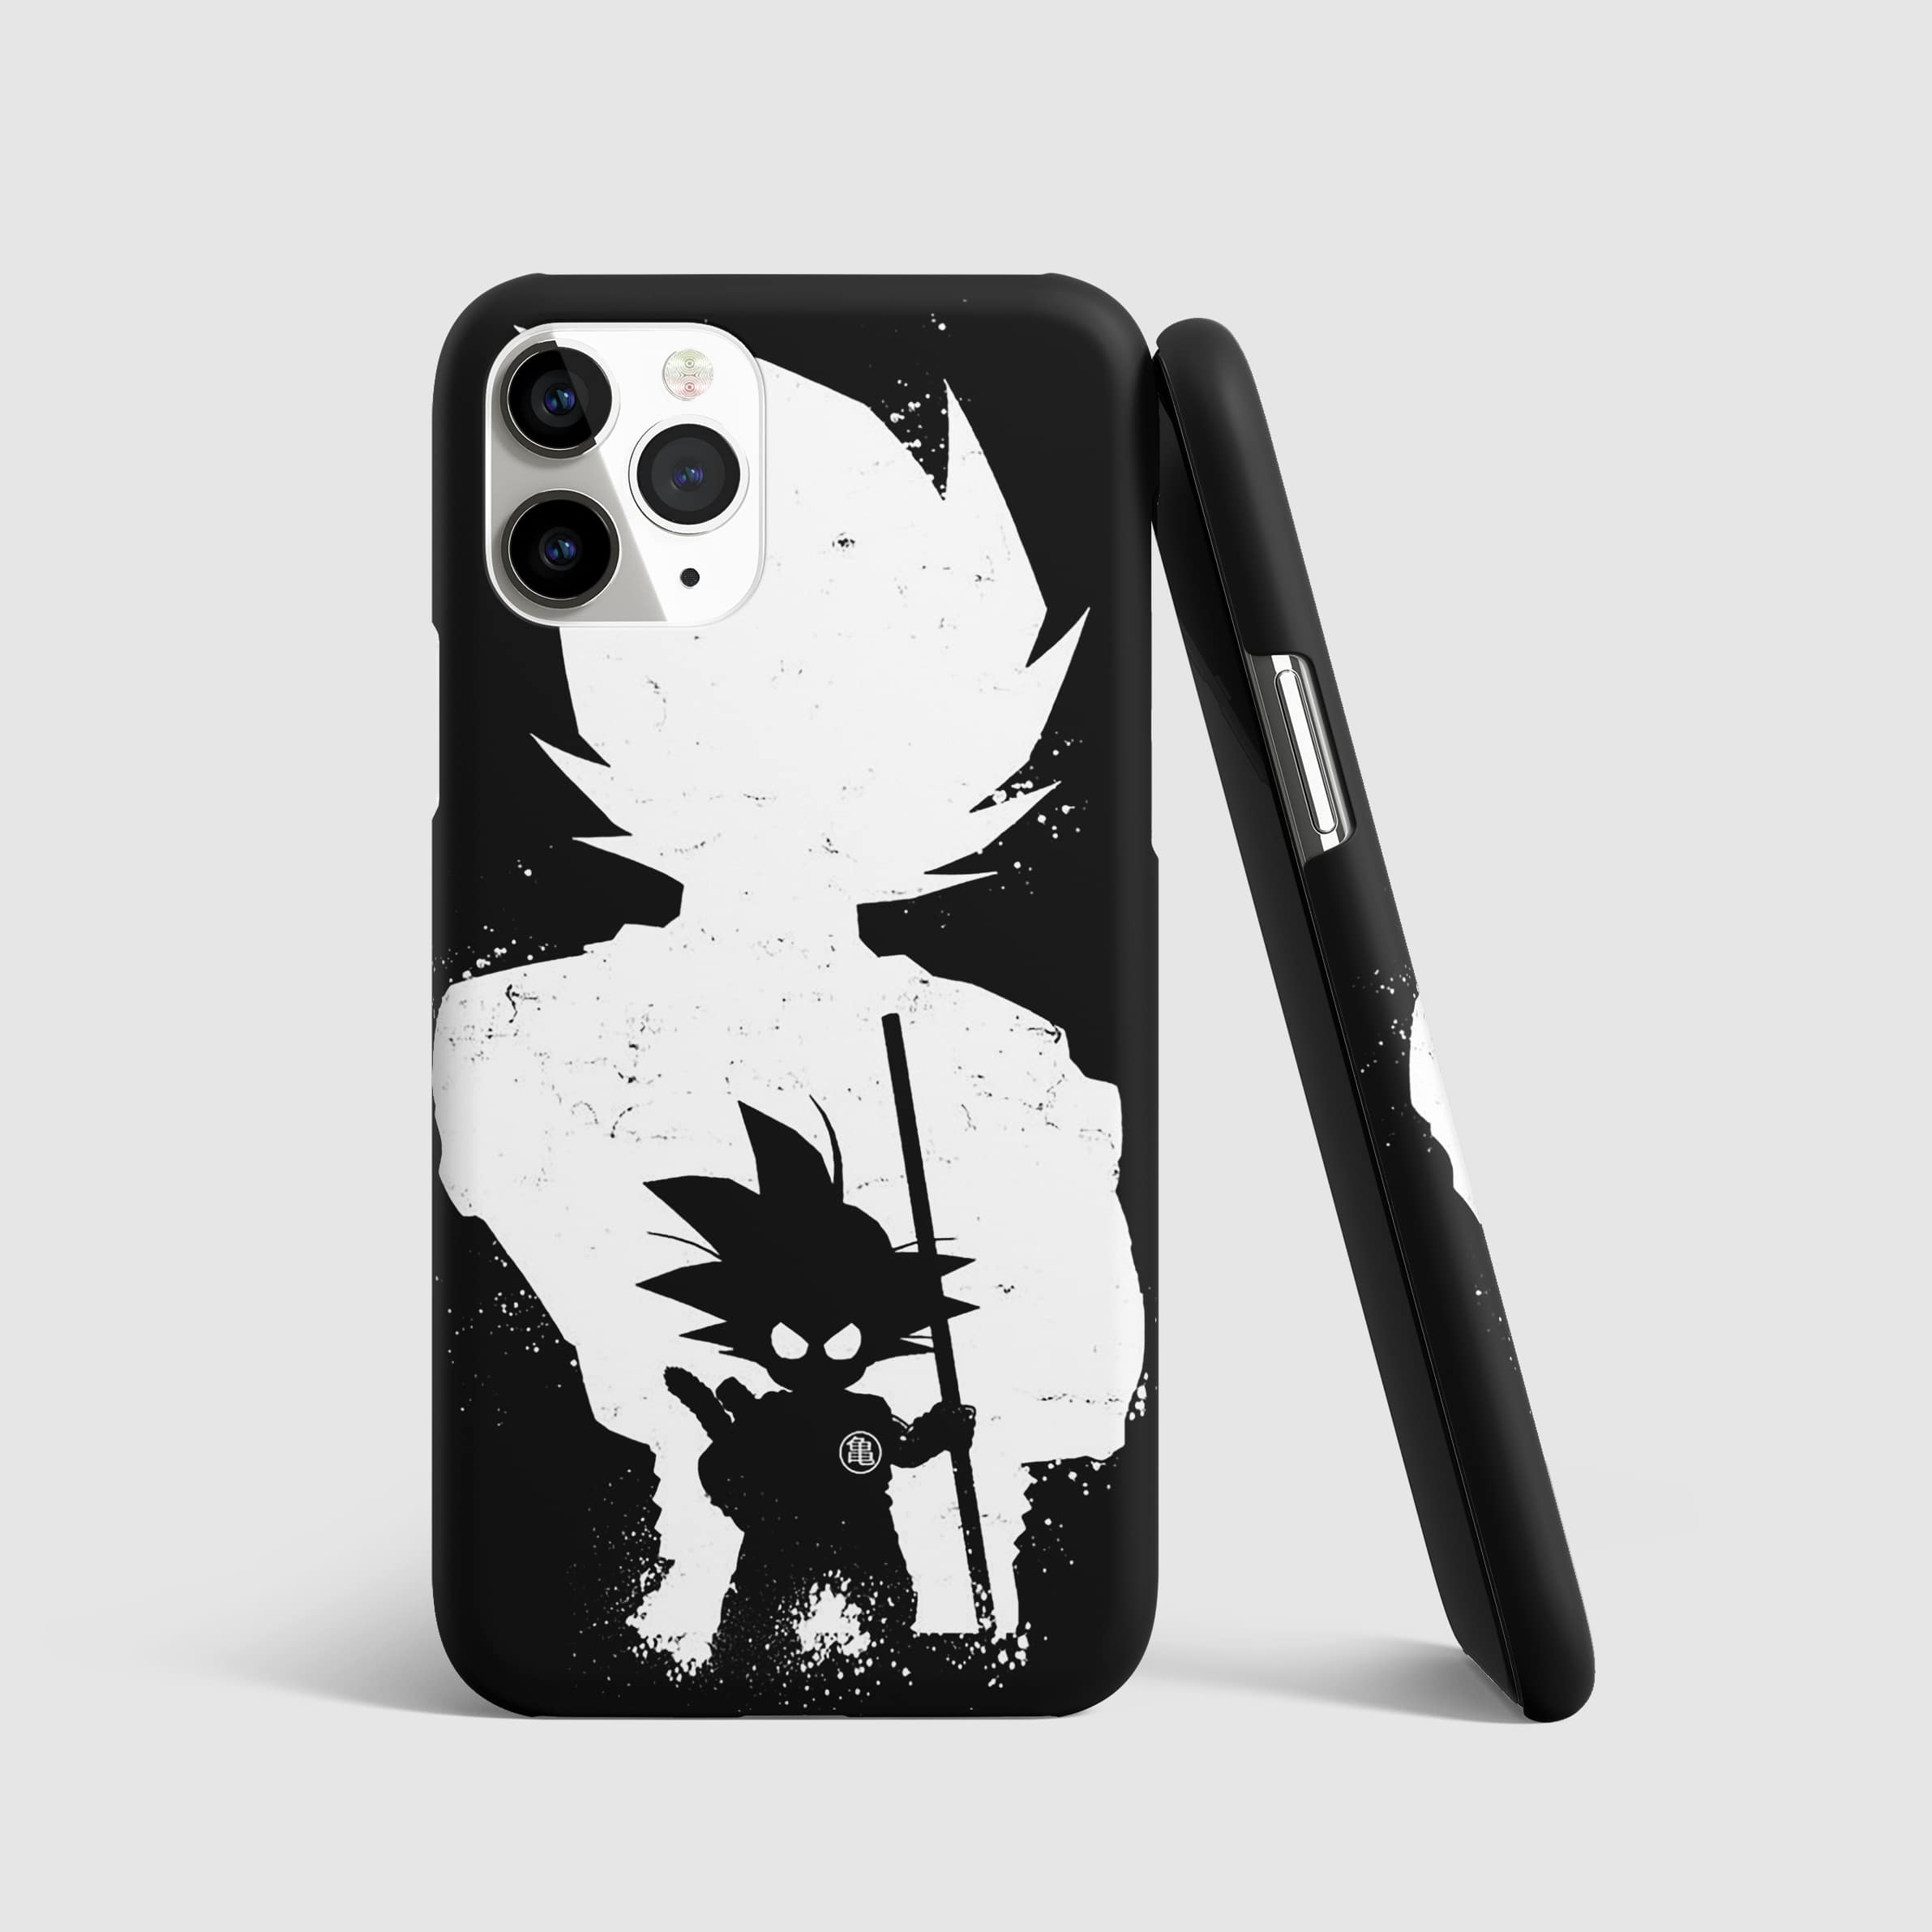 Artistic black and white image of Gohan on phone cover.